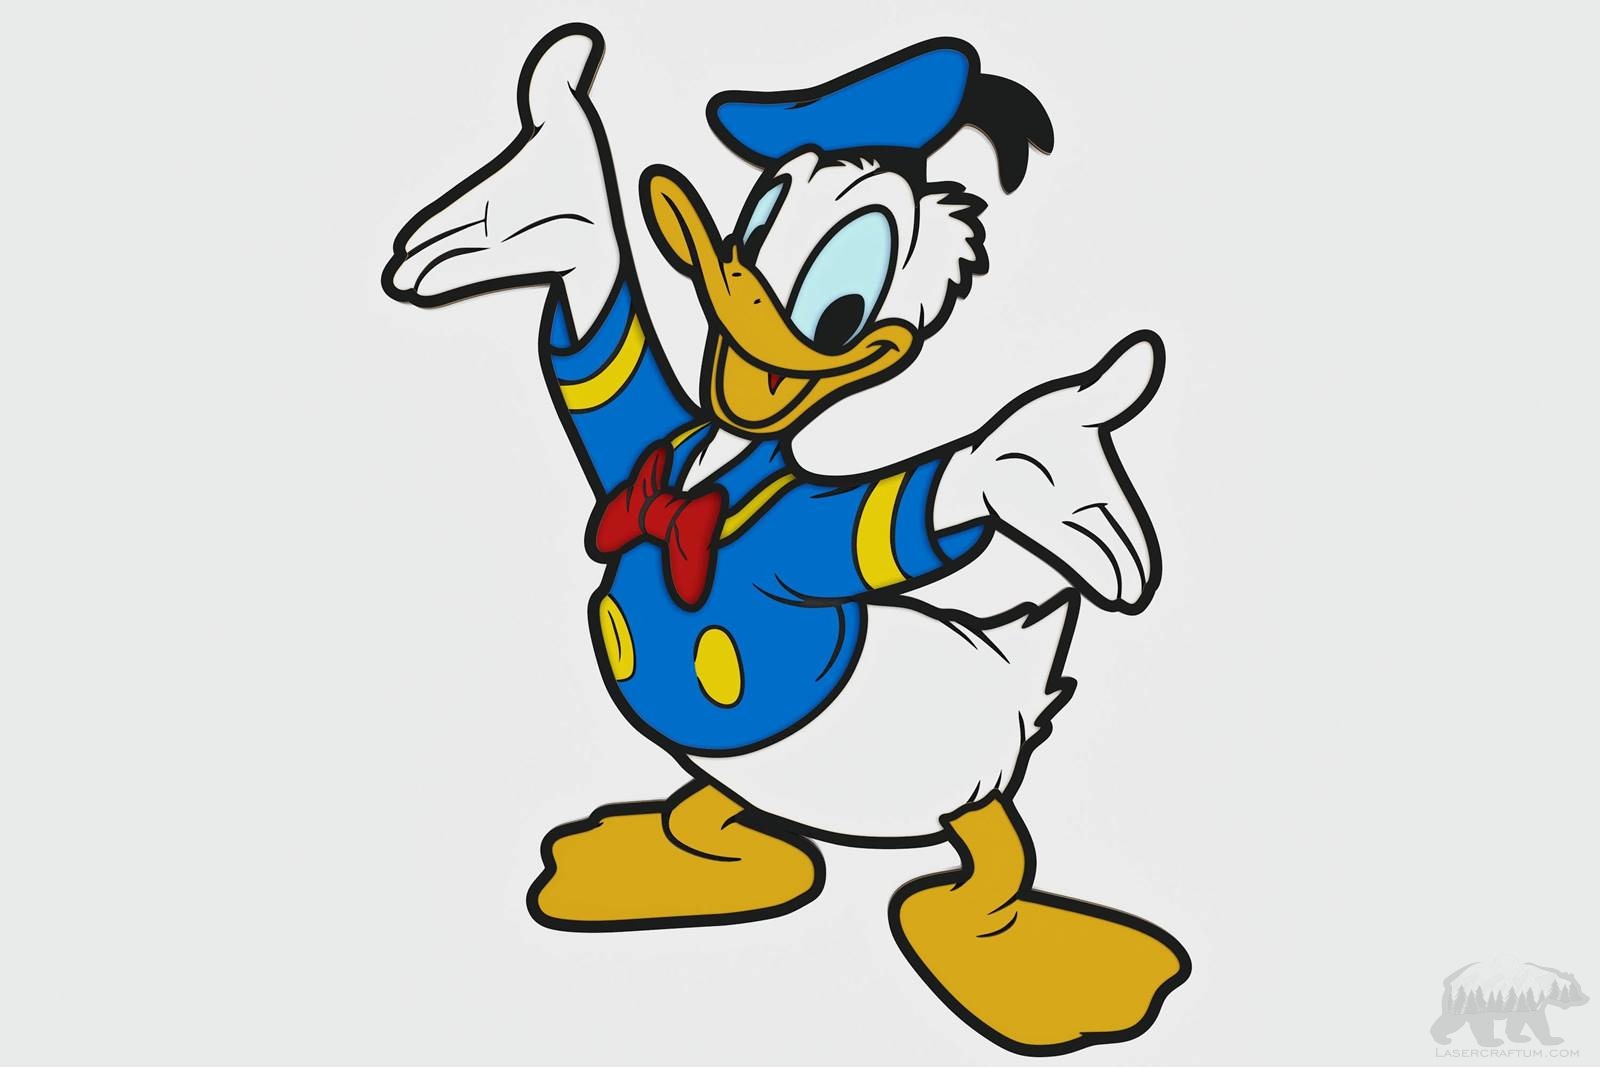 Donald Duck Layered Design for cutting